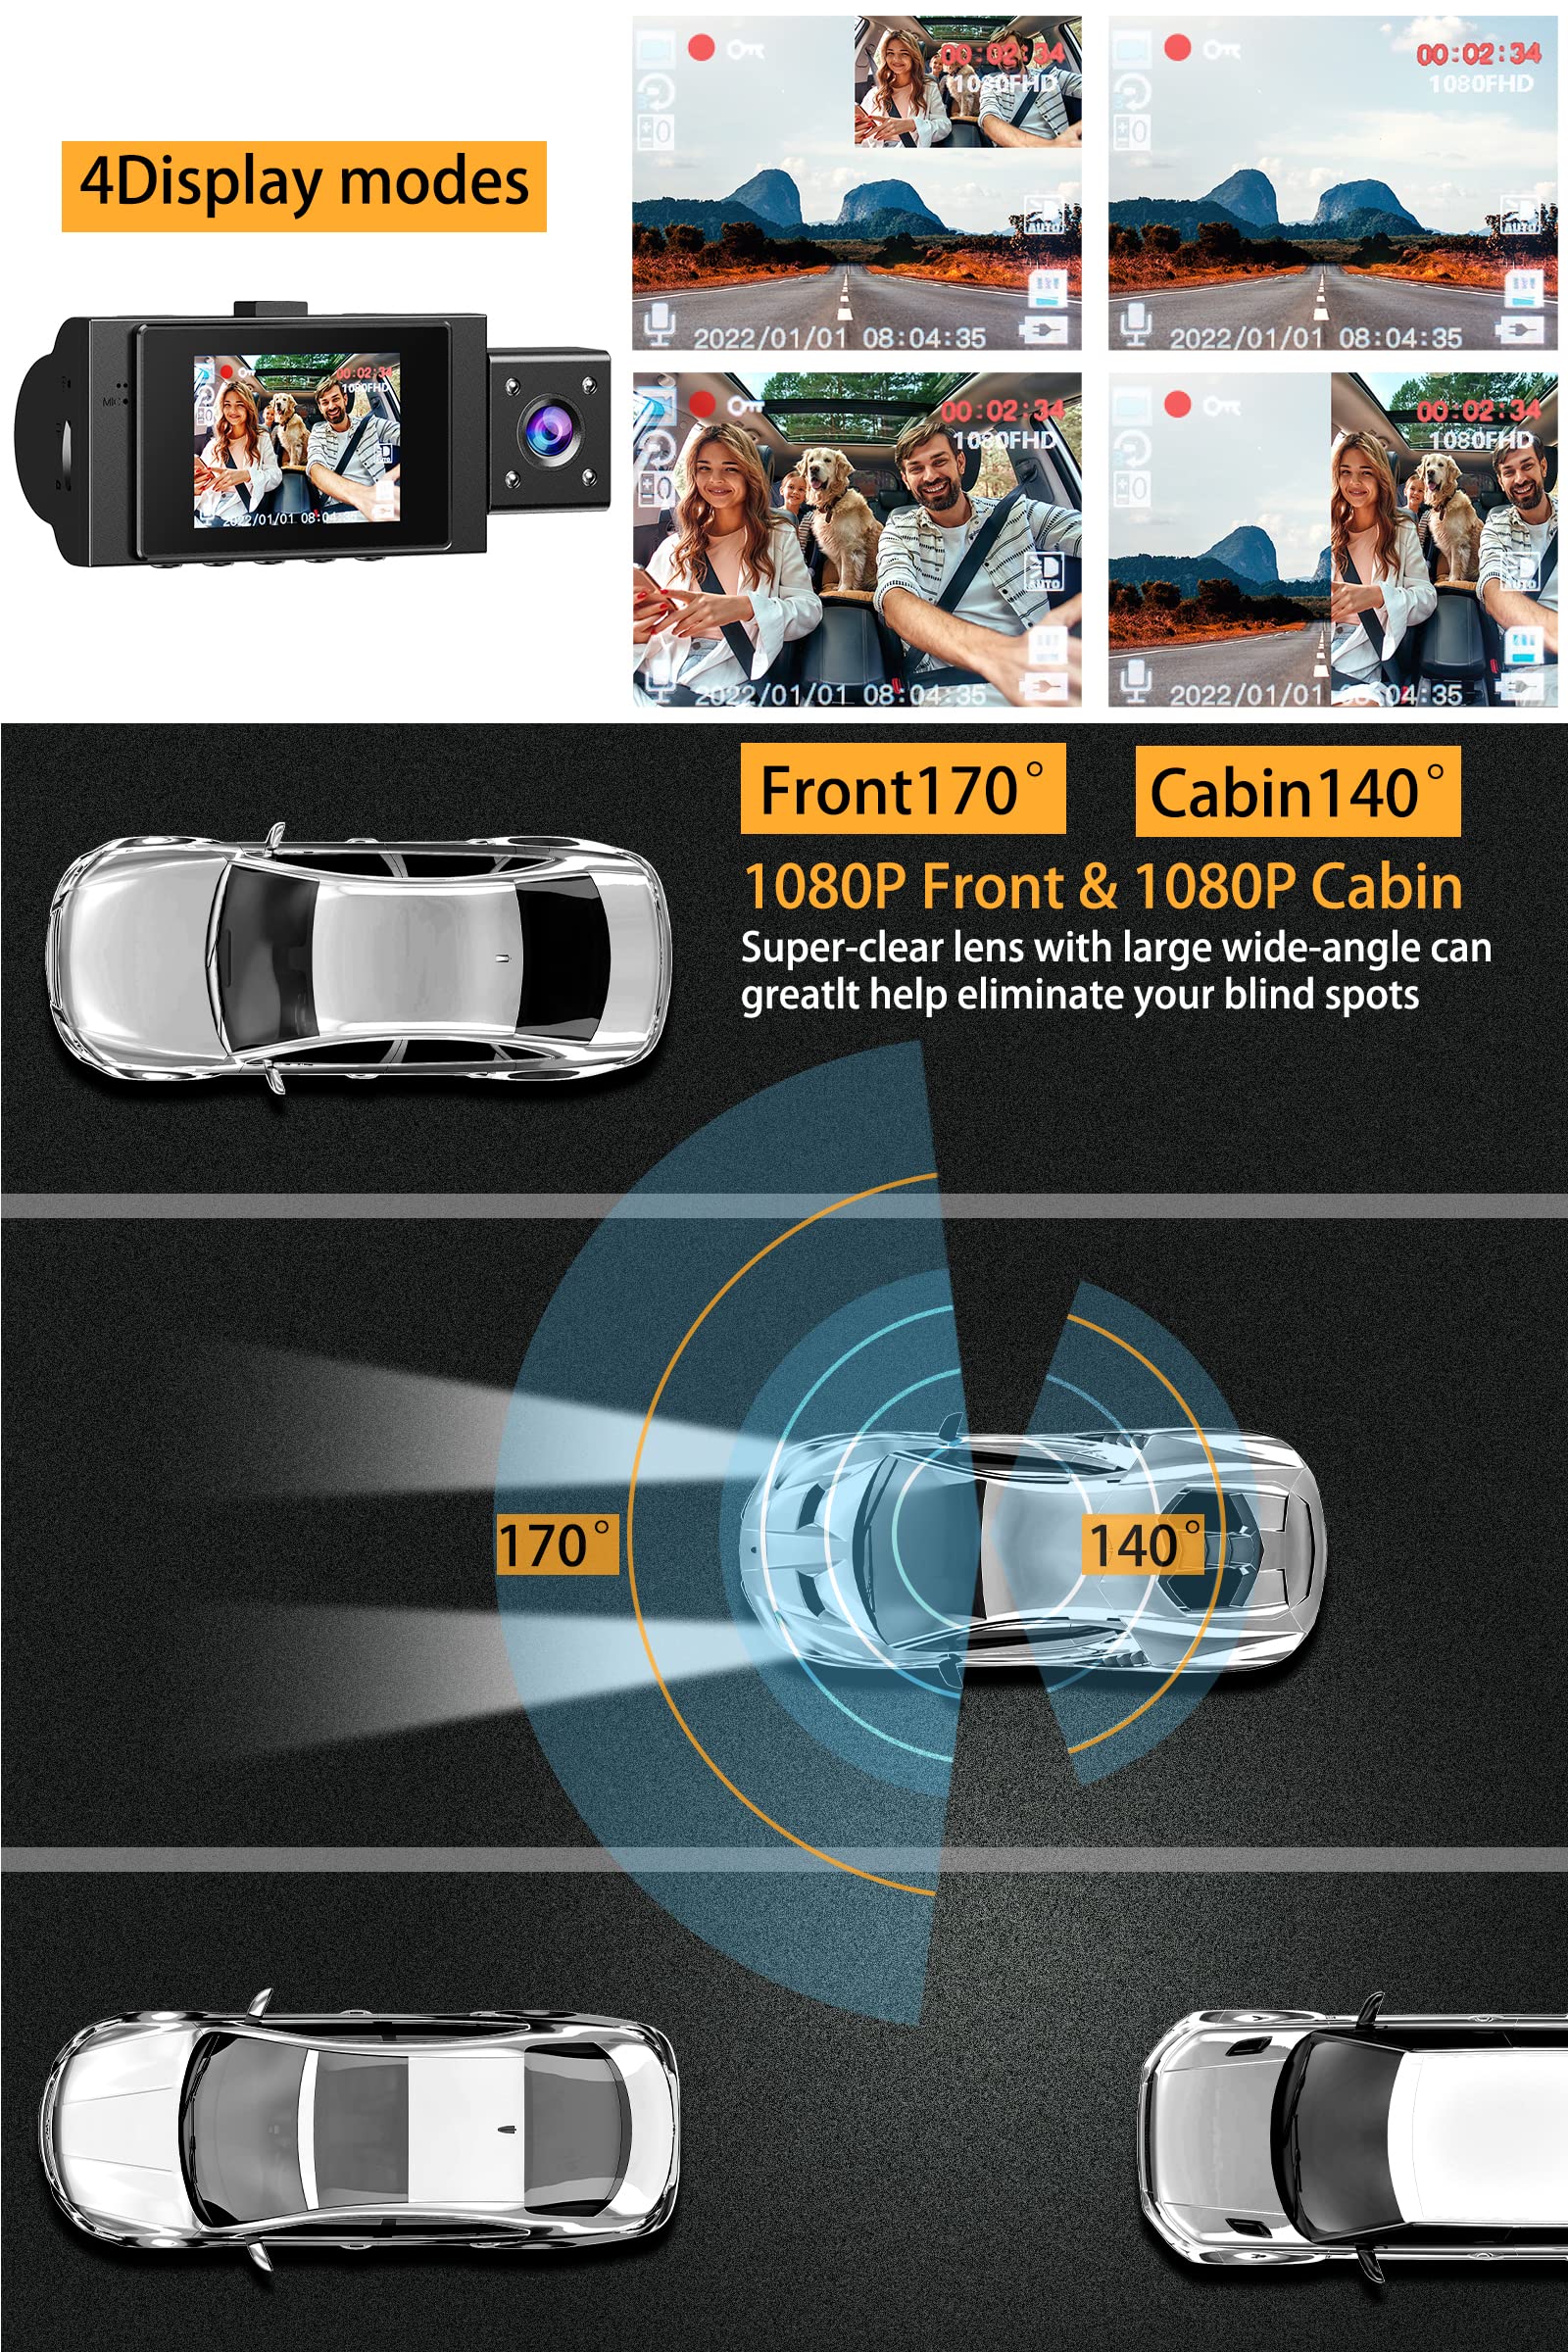 Bundle Include 64GB Micro Memory Card + Yansoo Dual Dash Cam Front and Inside